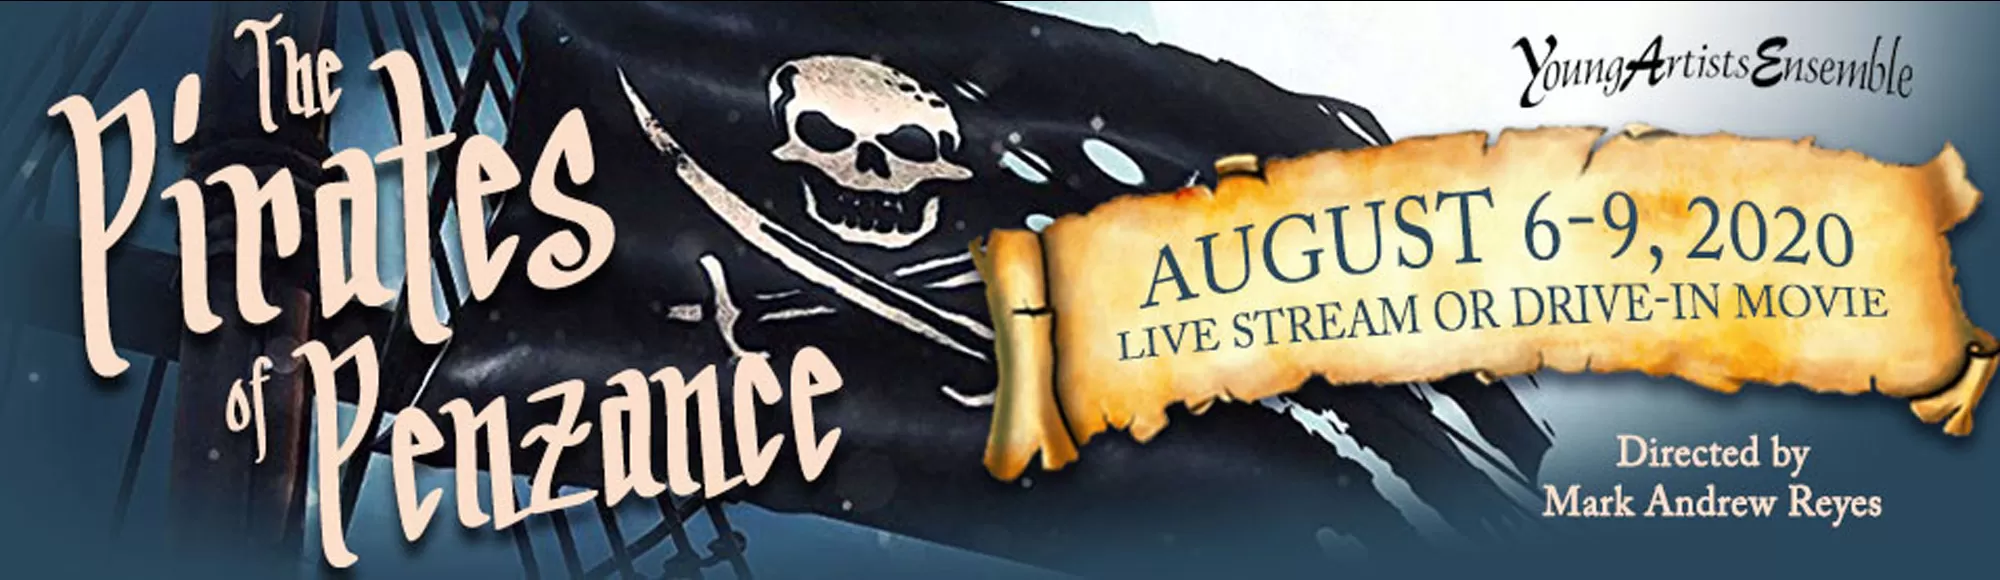 Full Cast Live Stream 8/9/20 The Pirates of Penzance - YouTube Live